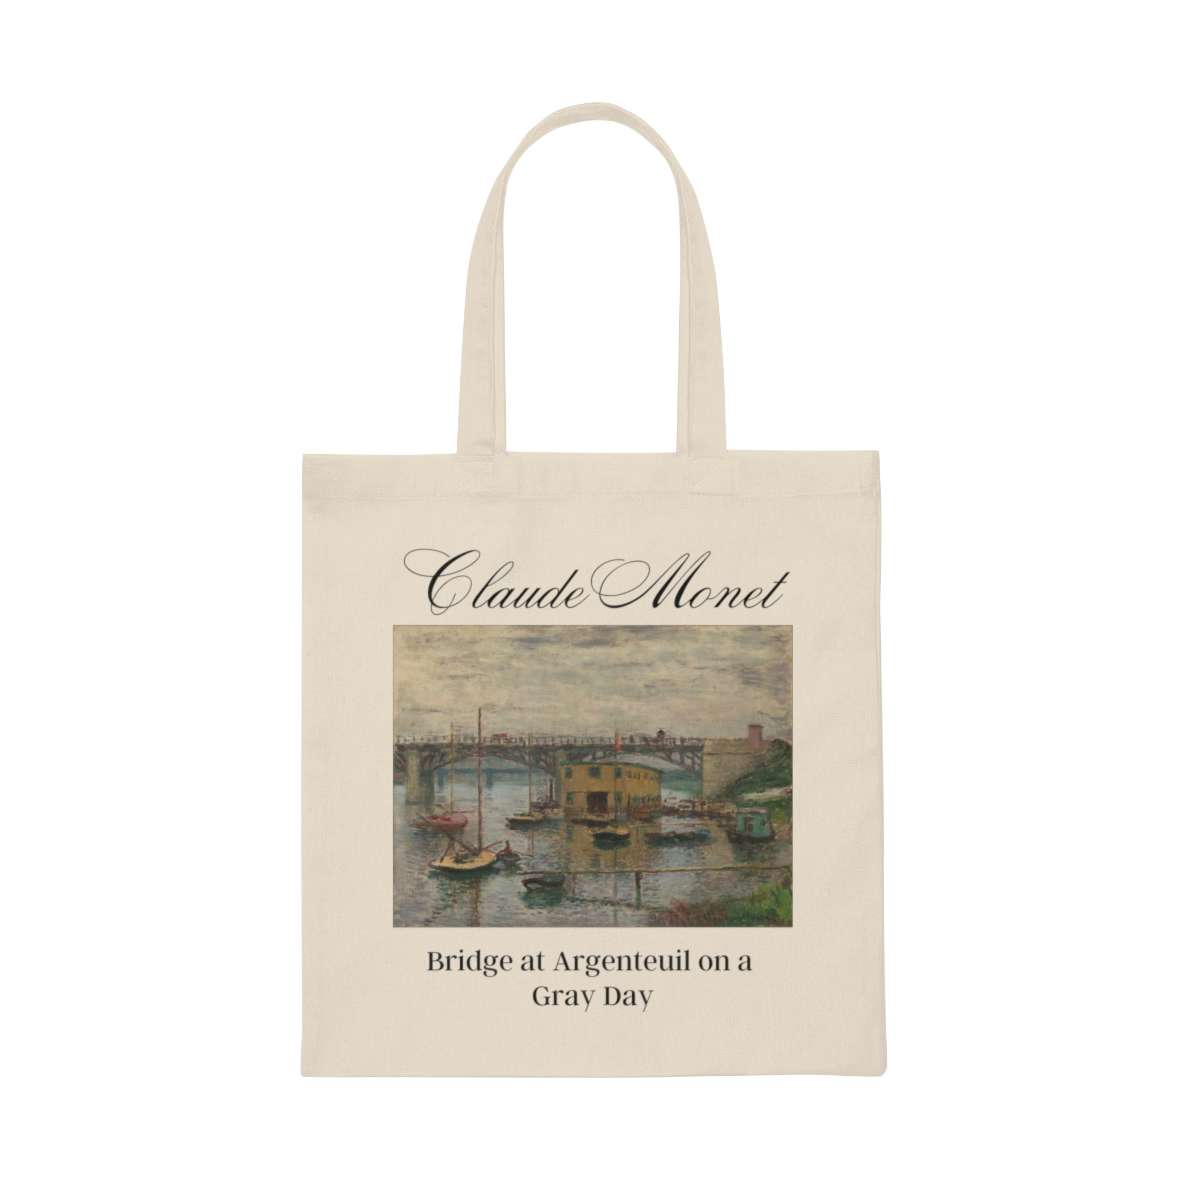 Taking A Walk Near Argenteuil Tote Bag aesthetic Tote 